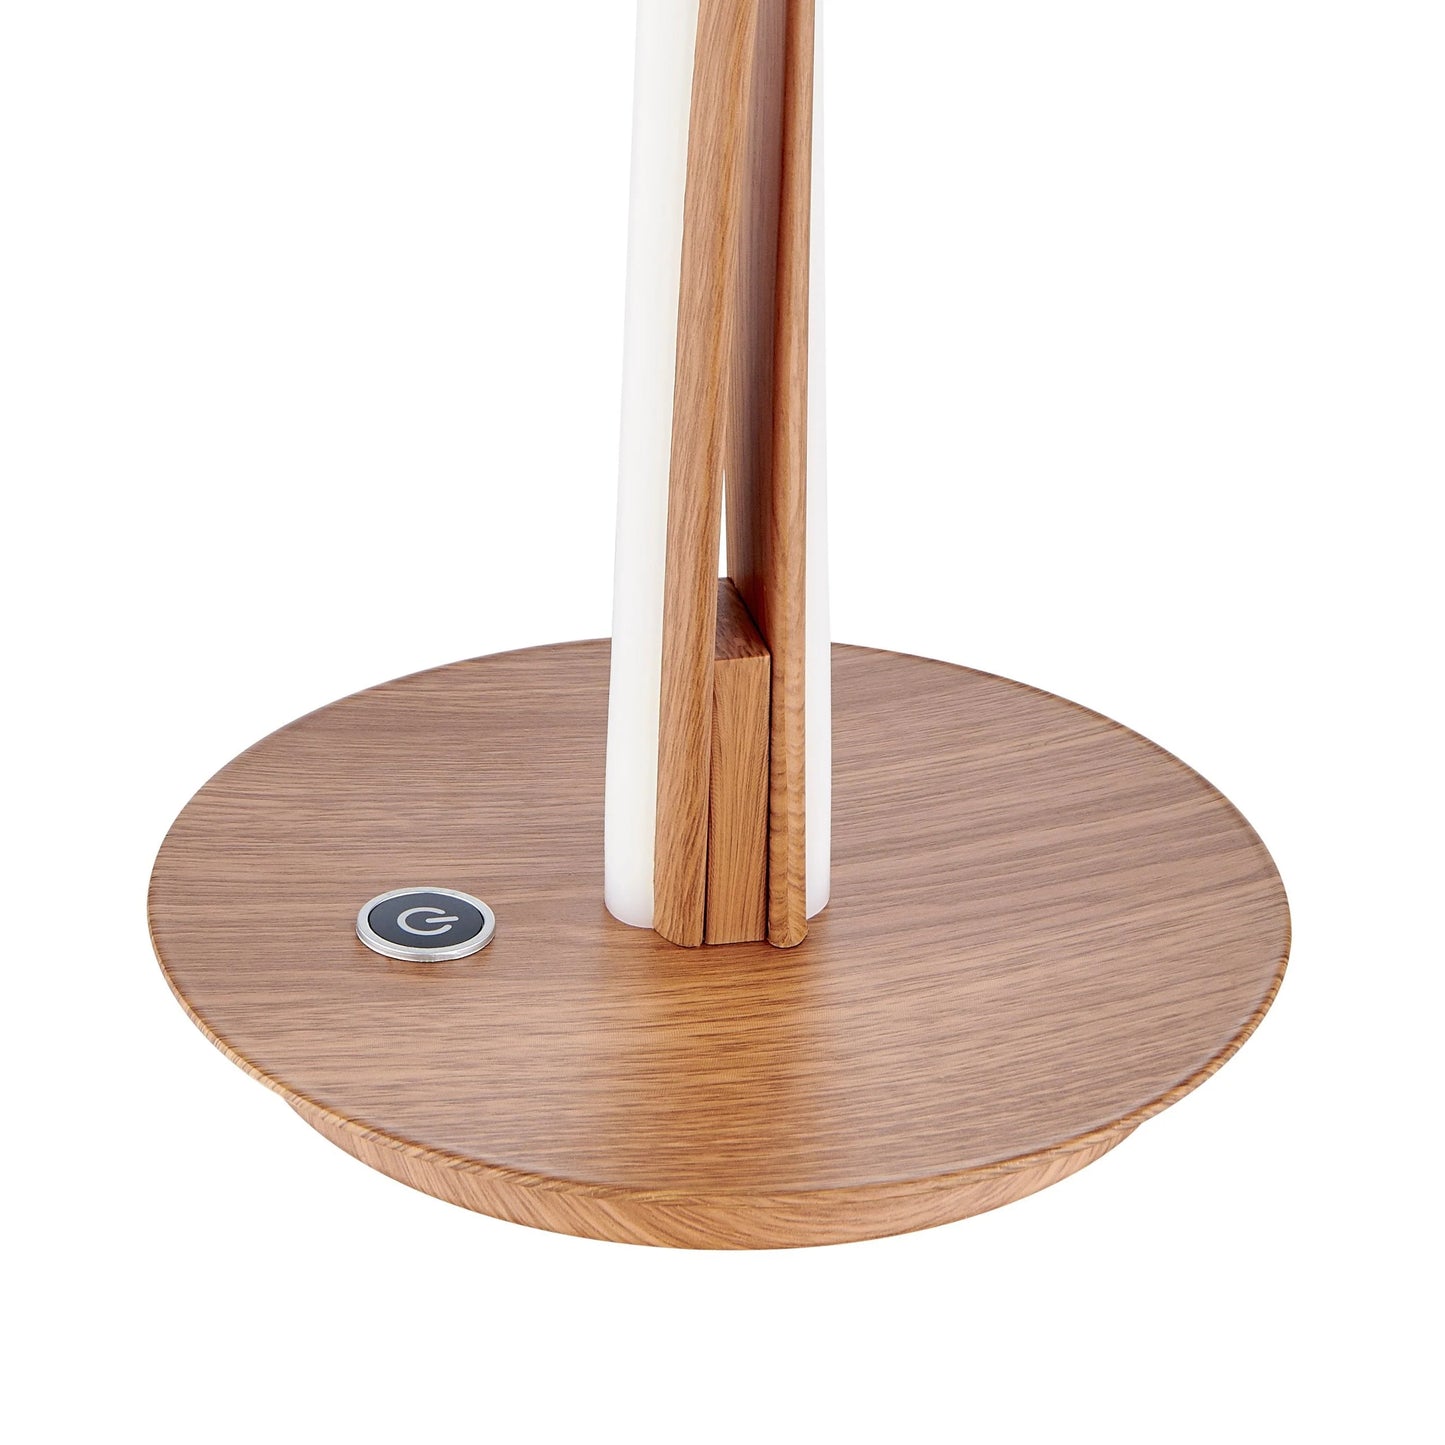 Finesse Decor Munich Wood Table Lamp - LED Strip and Touch Dimmer 4